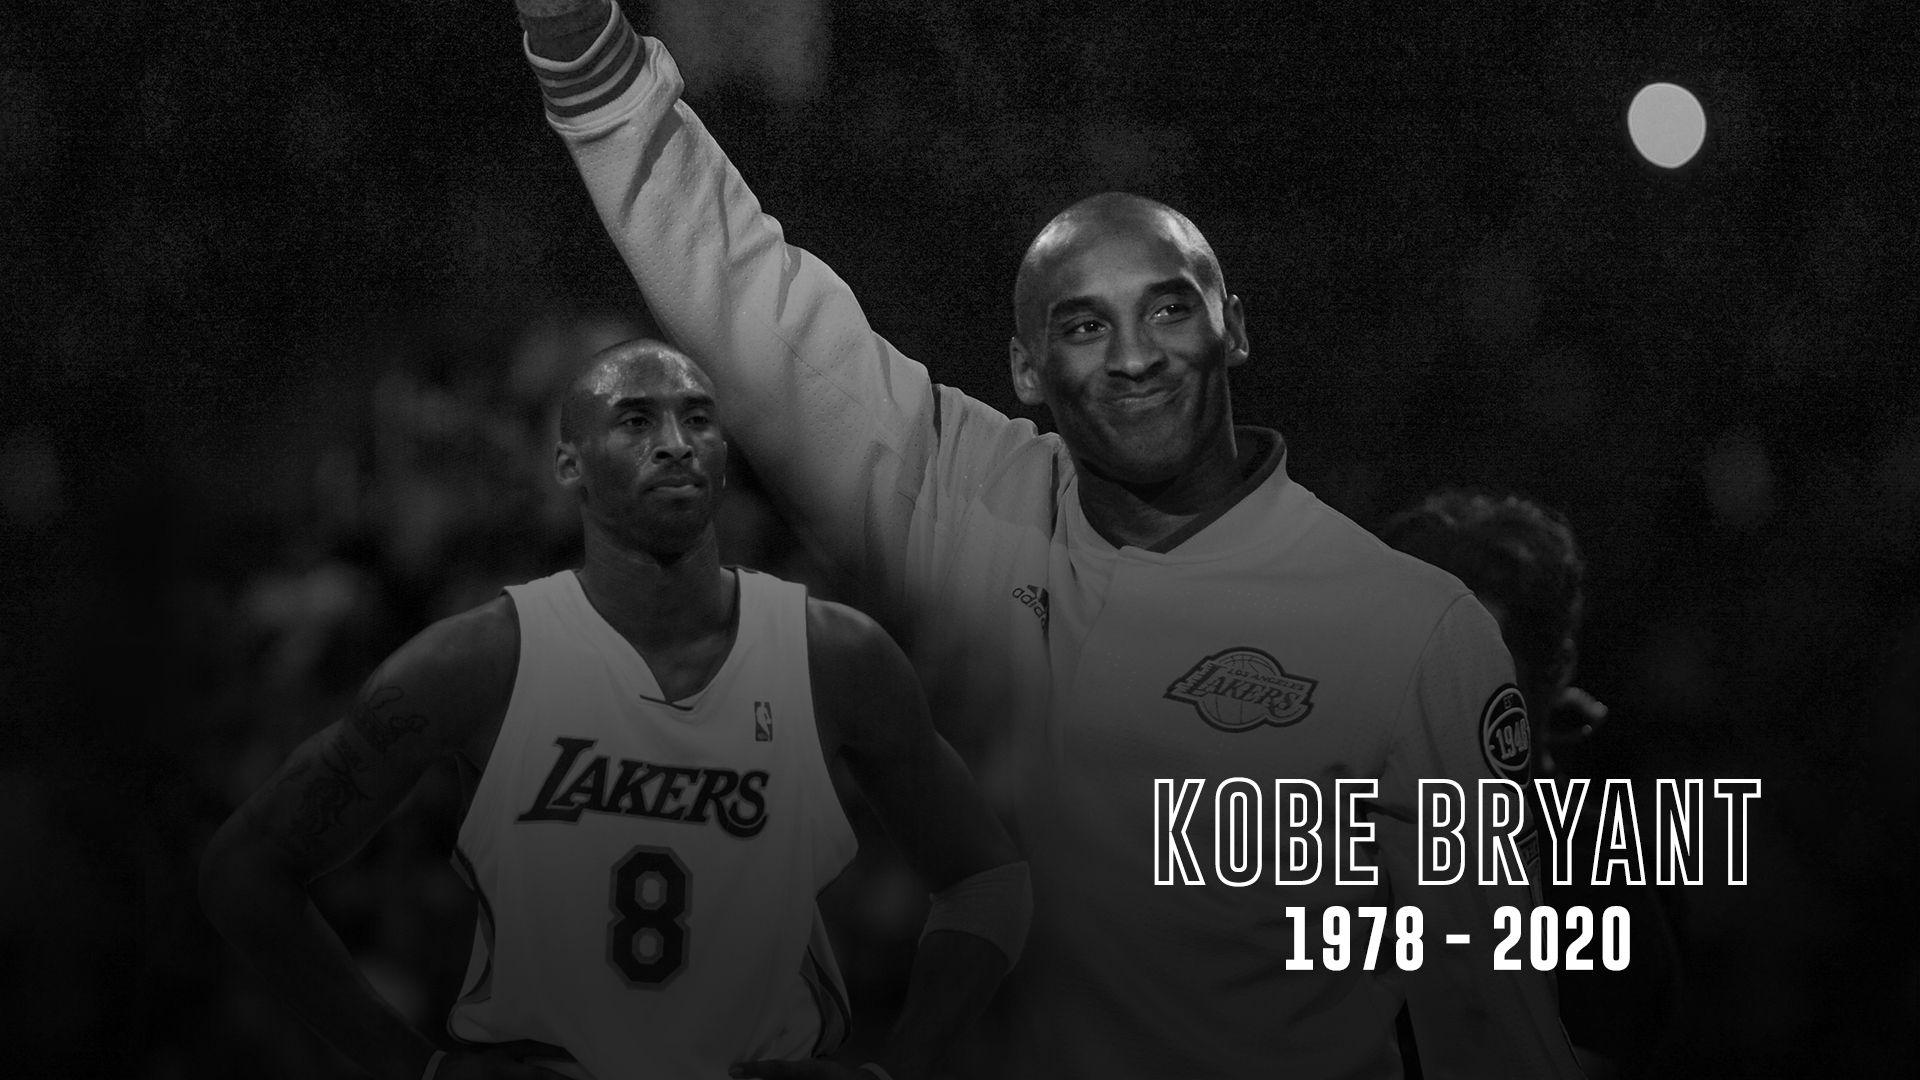 Live coverage and reaction to Kobe Bryant's death